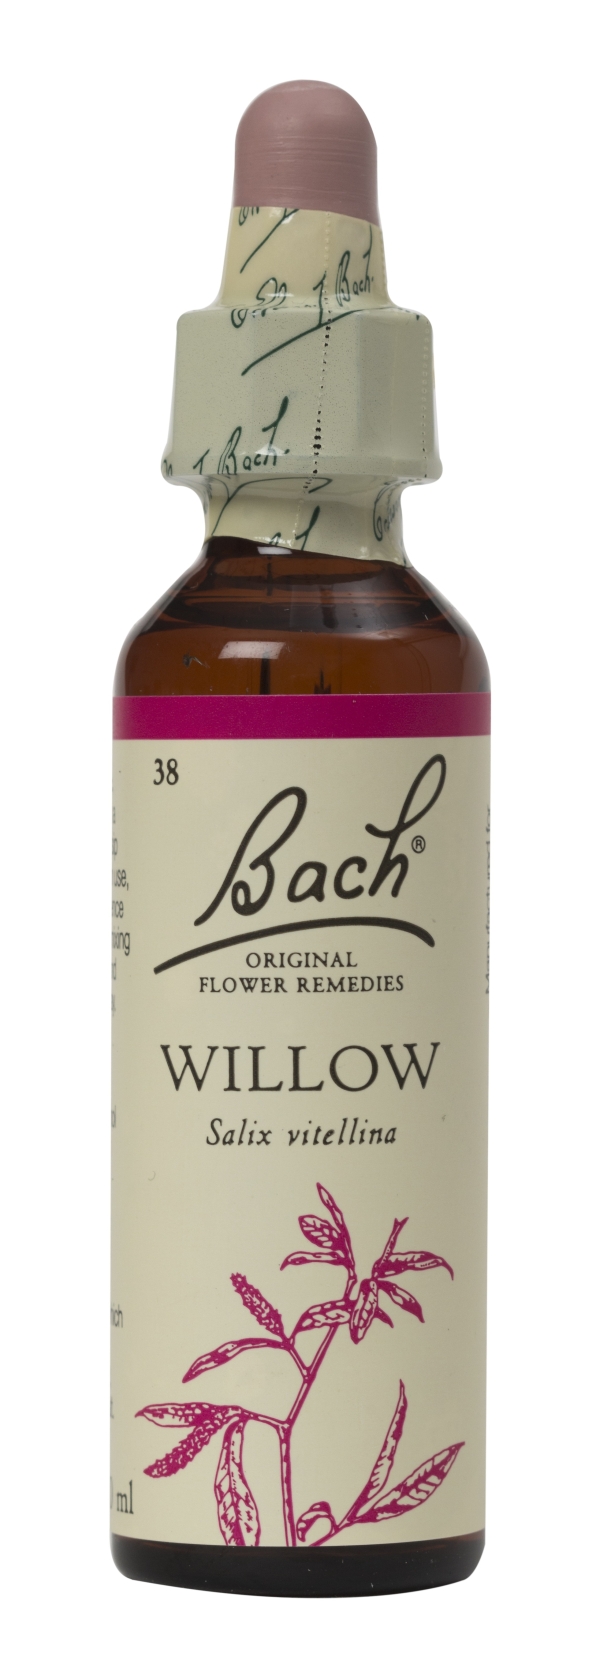 Nelson Bach Flower Remedies: Bach Willow  Flower Remedy (20ml) available online here